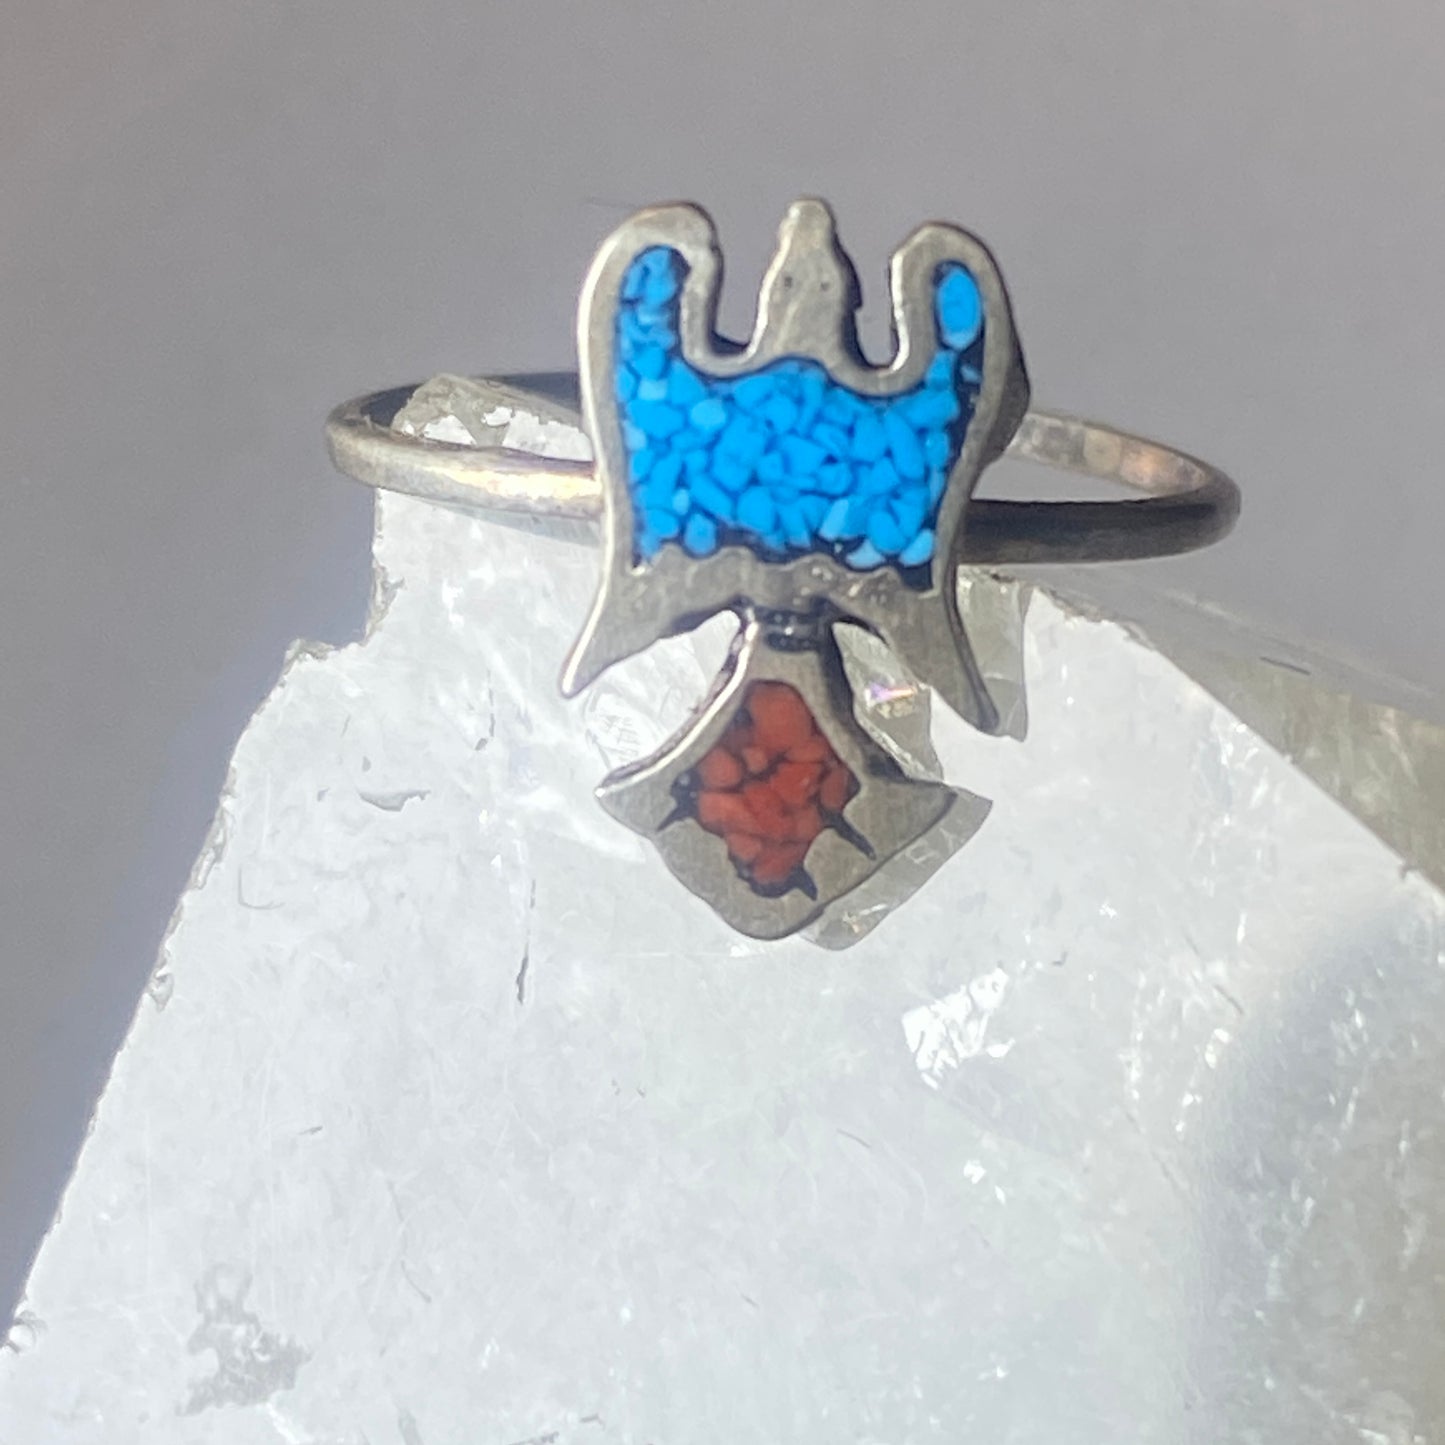 Phoenix ring turquoise coral chips southwest sterling silver women girls f